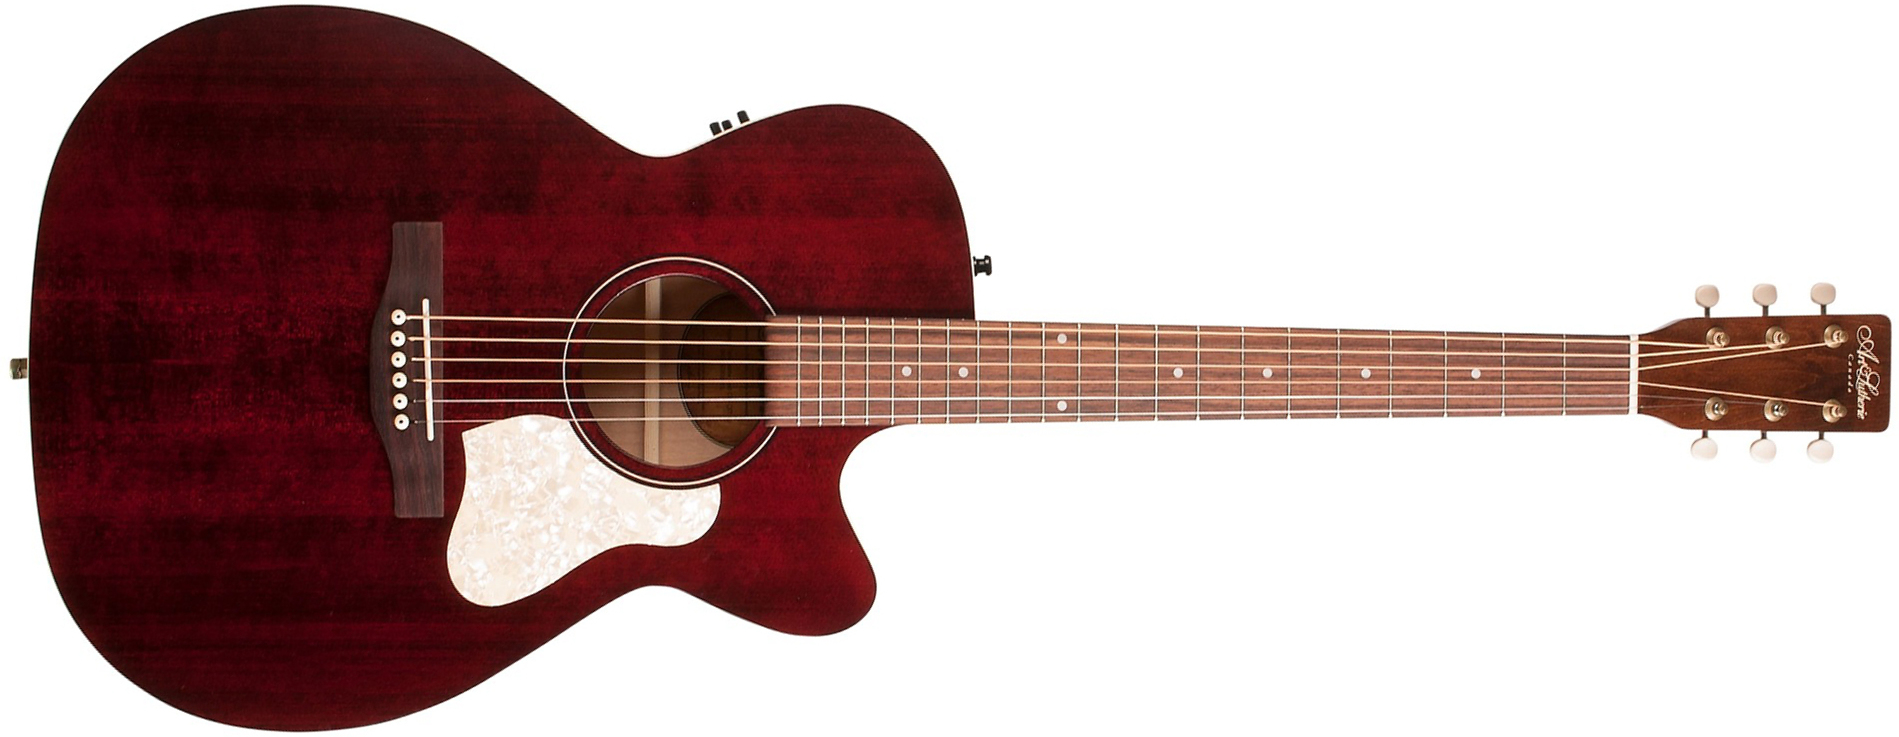 Art Et Lutherie Legacy Cw Presys Ii Concert Hall Cedre Merisier Rw - Tennessee Red - Guitarra electro acustica - Main picture